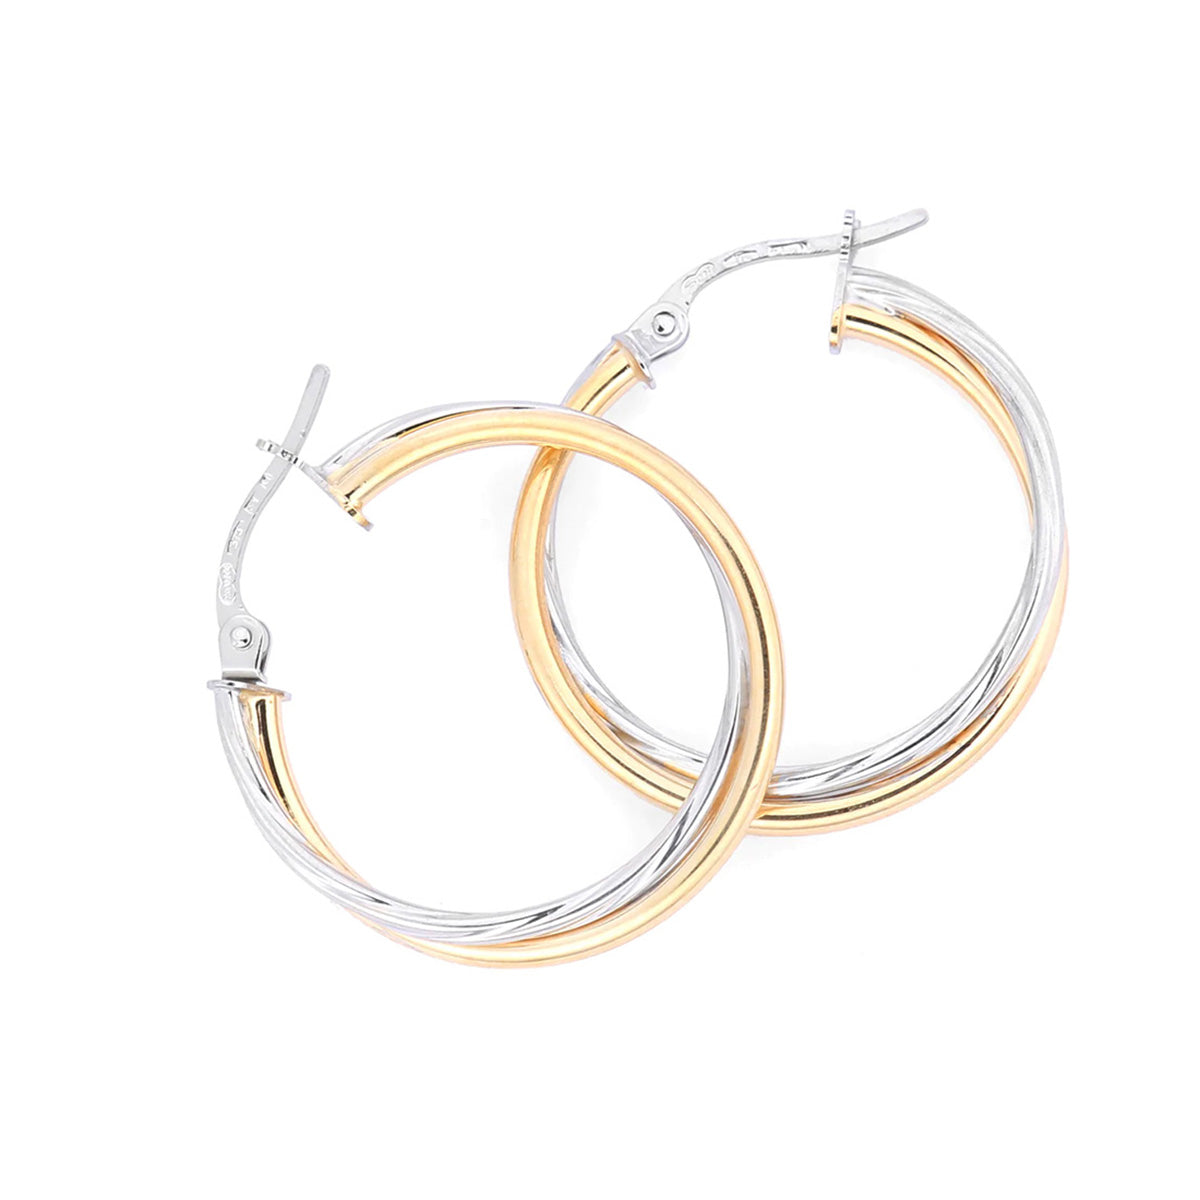 9K 2 Colour Gold 23mm Twisted Double Hoop Earrings